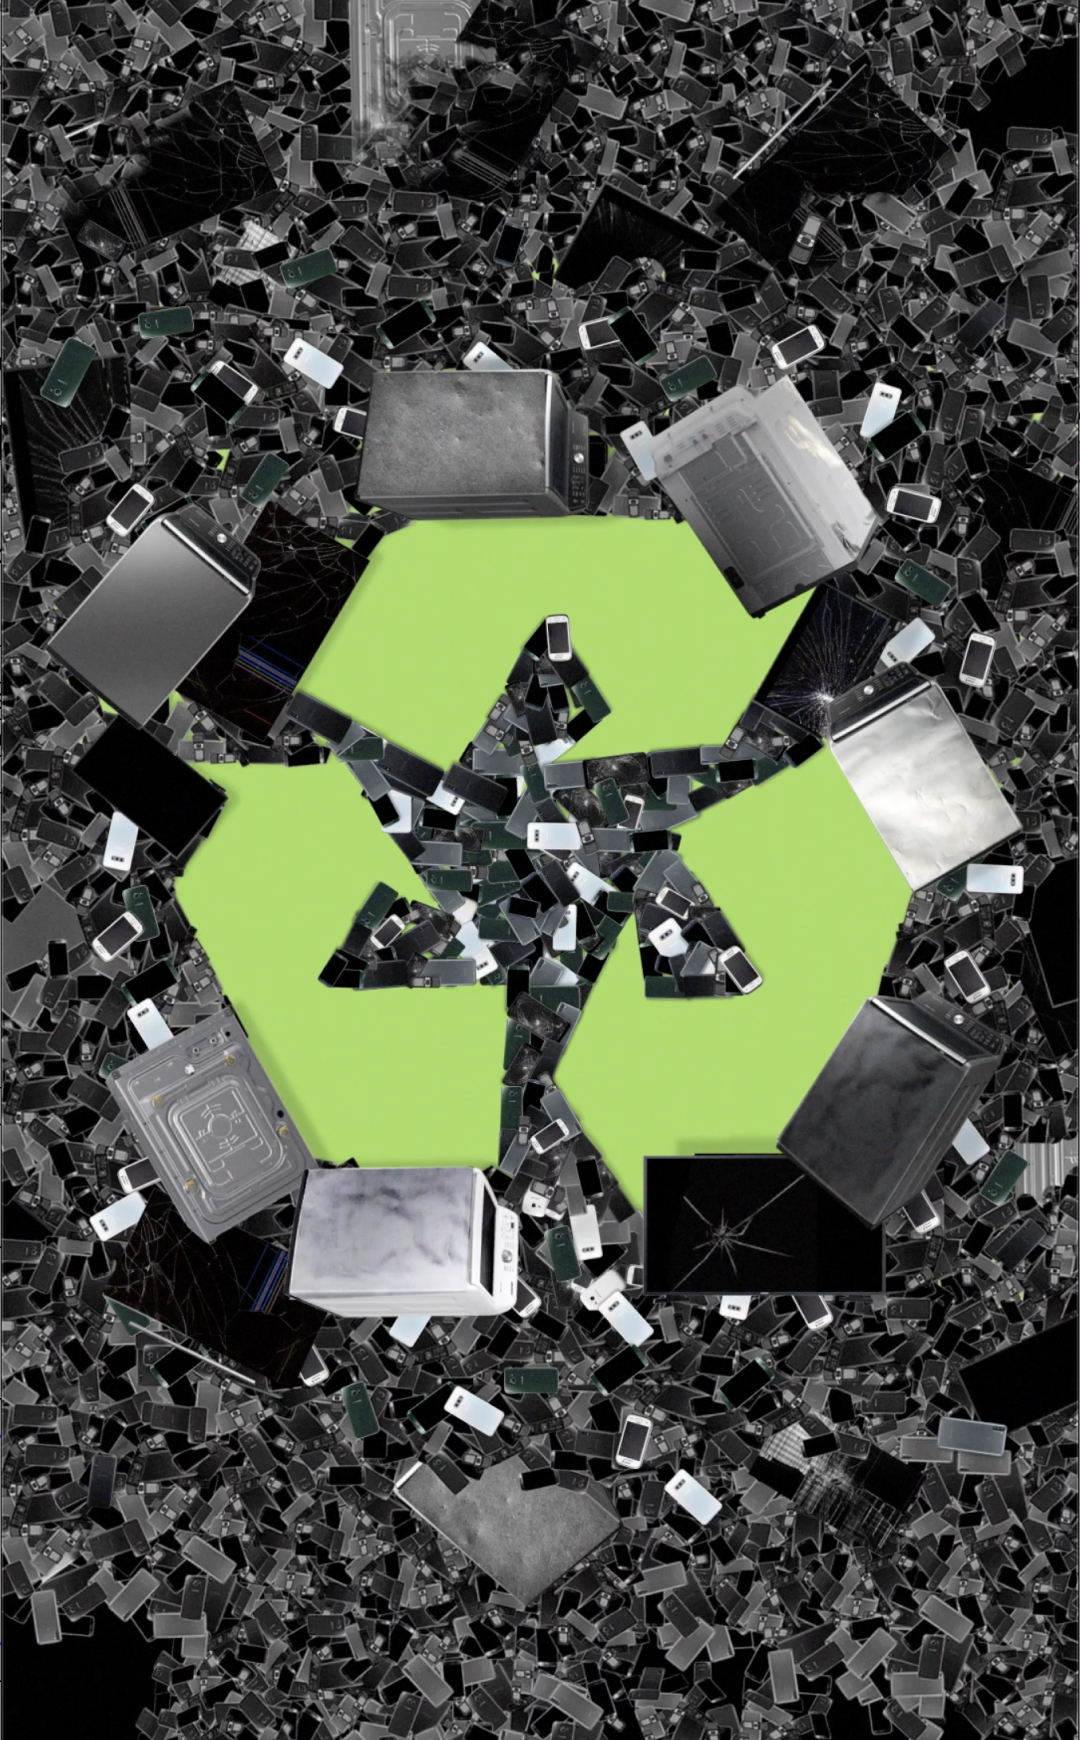 Sustainable 2024 agenda - recycled paper - World